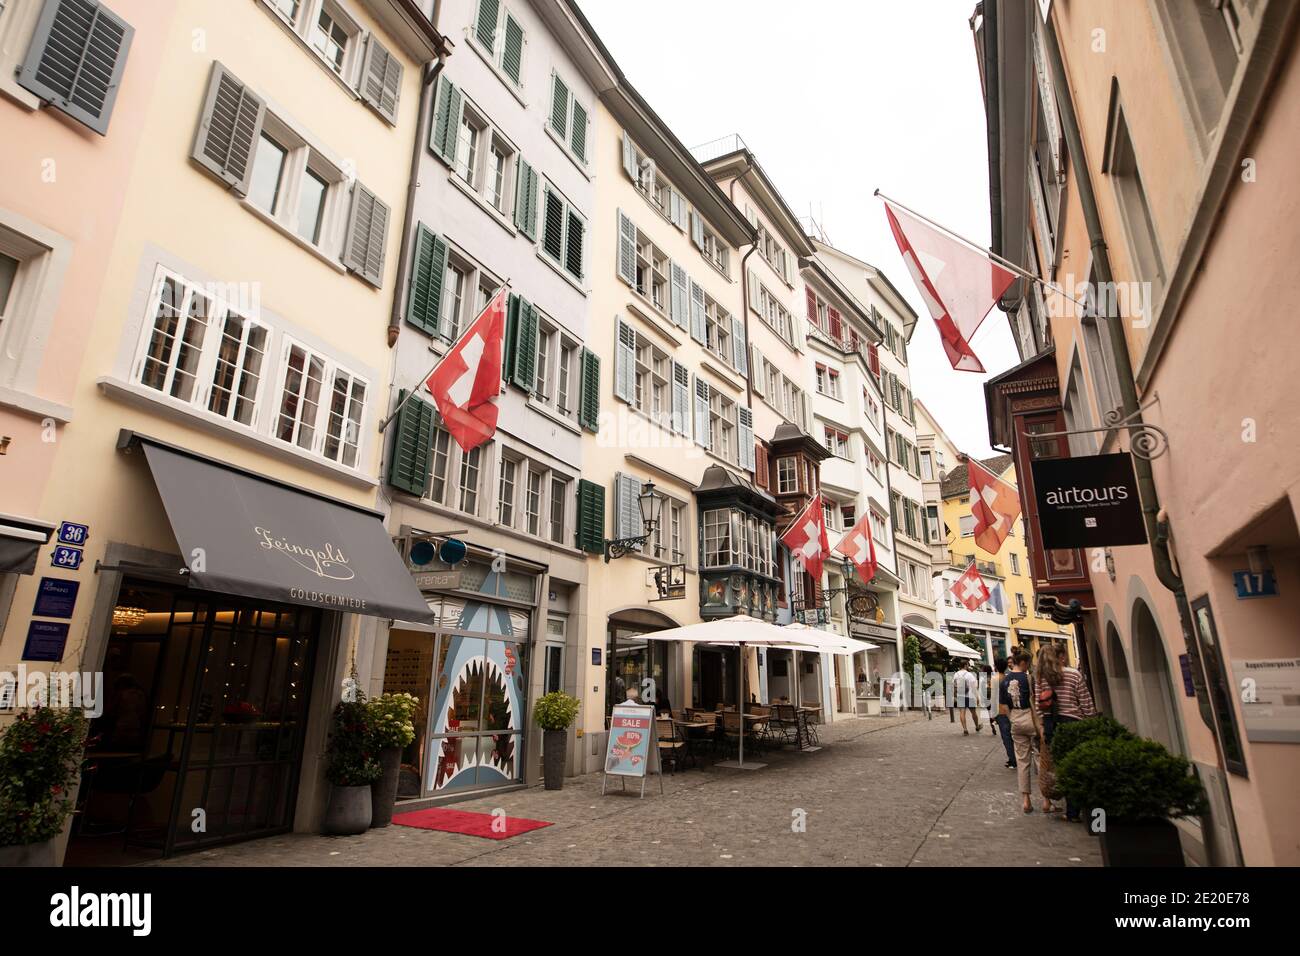 Shops and restaurants on Augustinergasse in the historic city of Zurich, Switzerland. Stock Photo